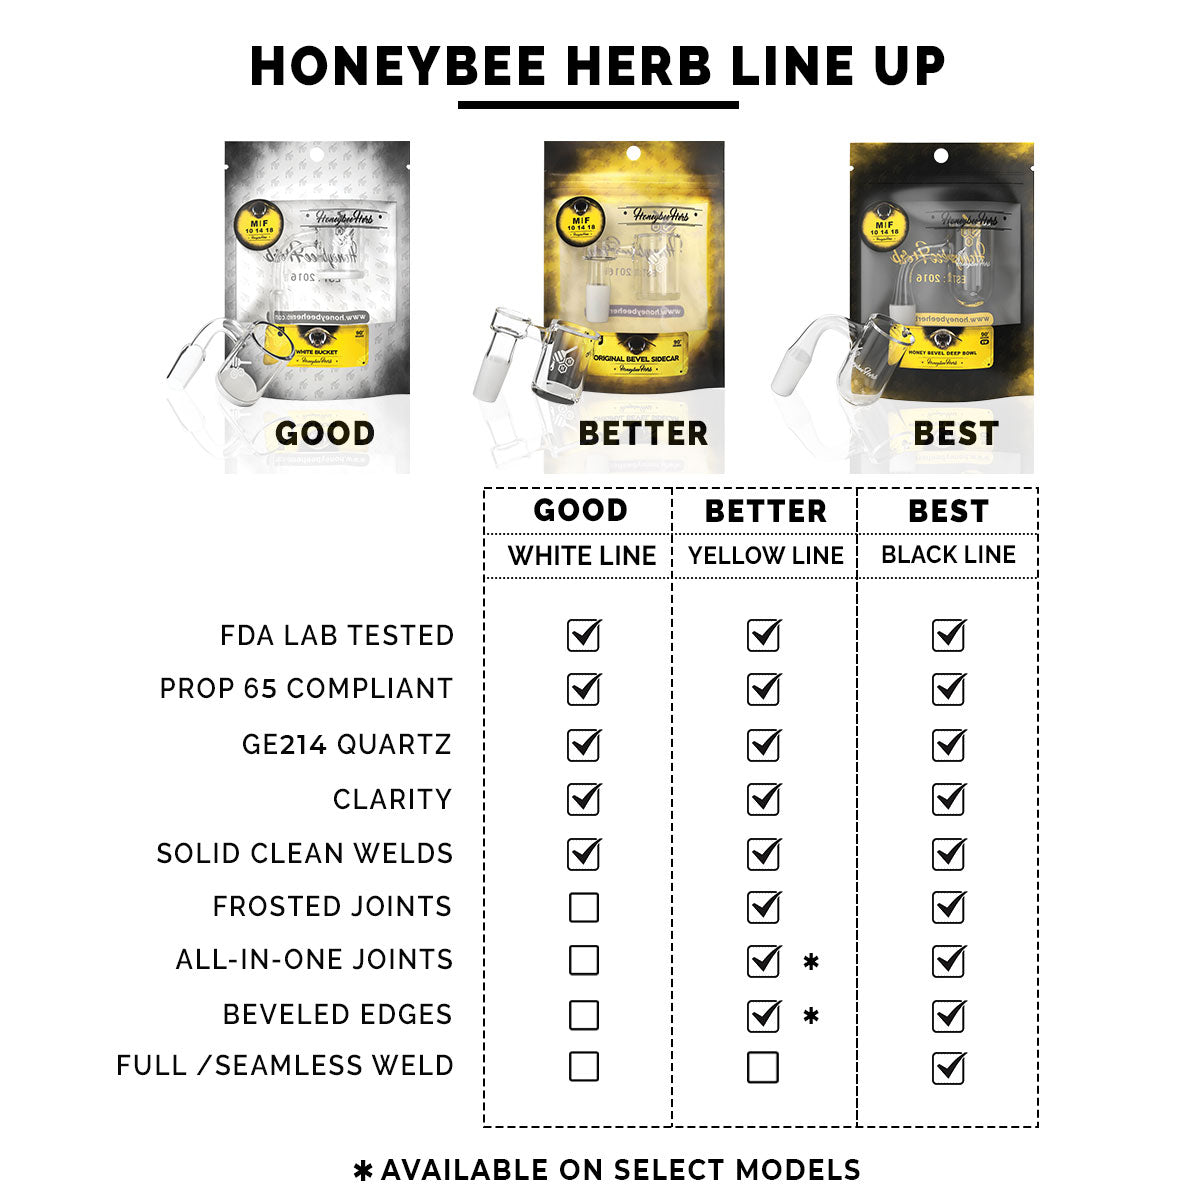 Honeybee Herb Quartz Banger Lineup Chart showcasing quality tiers from Good to Best